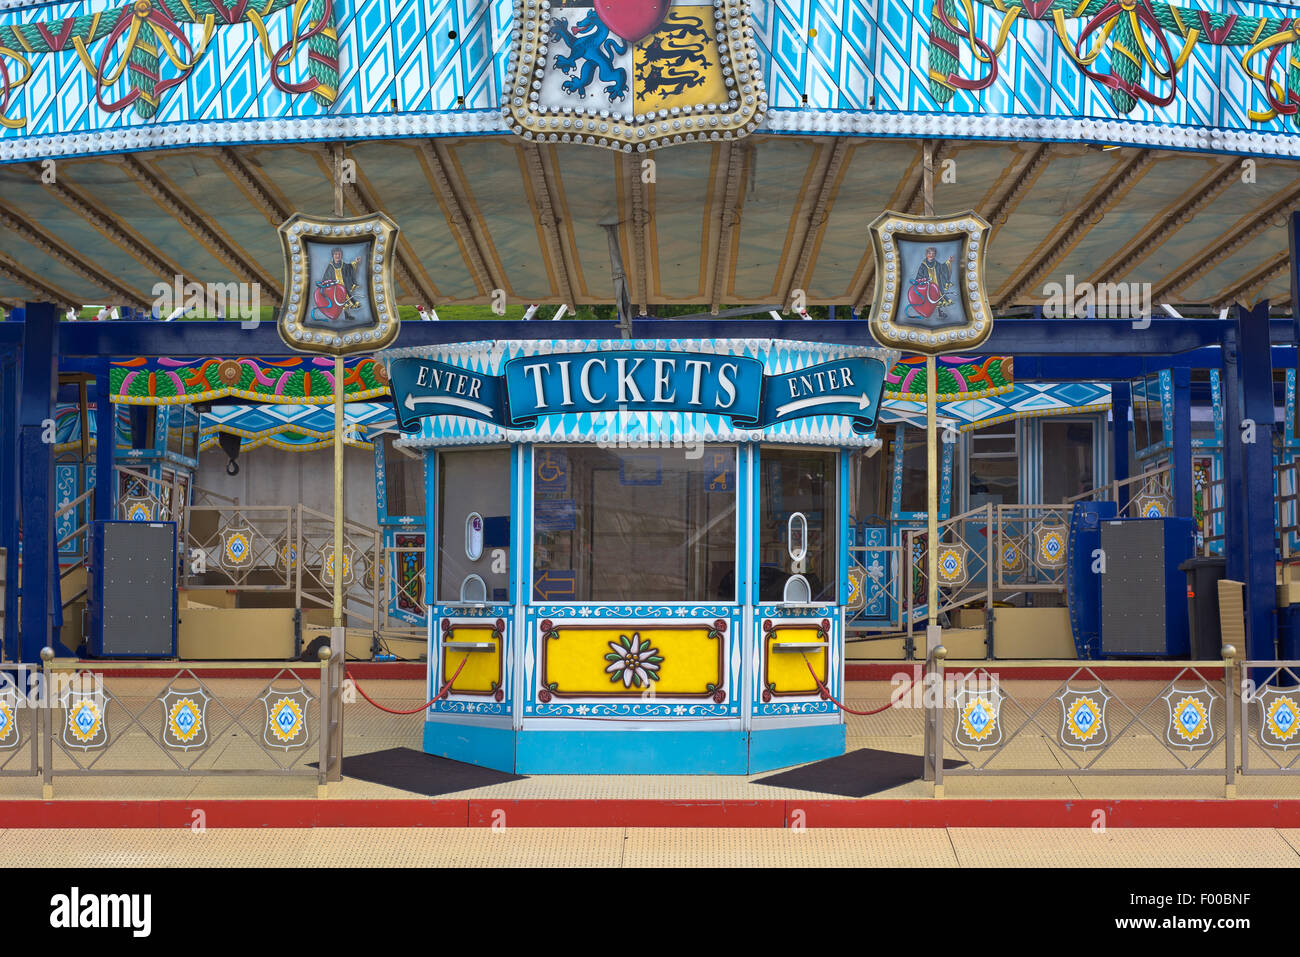 Amusement Park Ride Ticket Window with English Text and Decorations Stock Photo